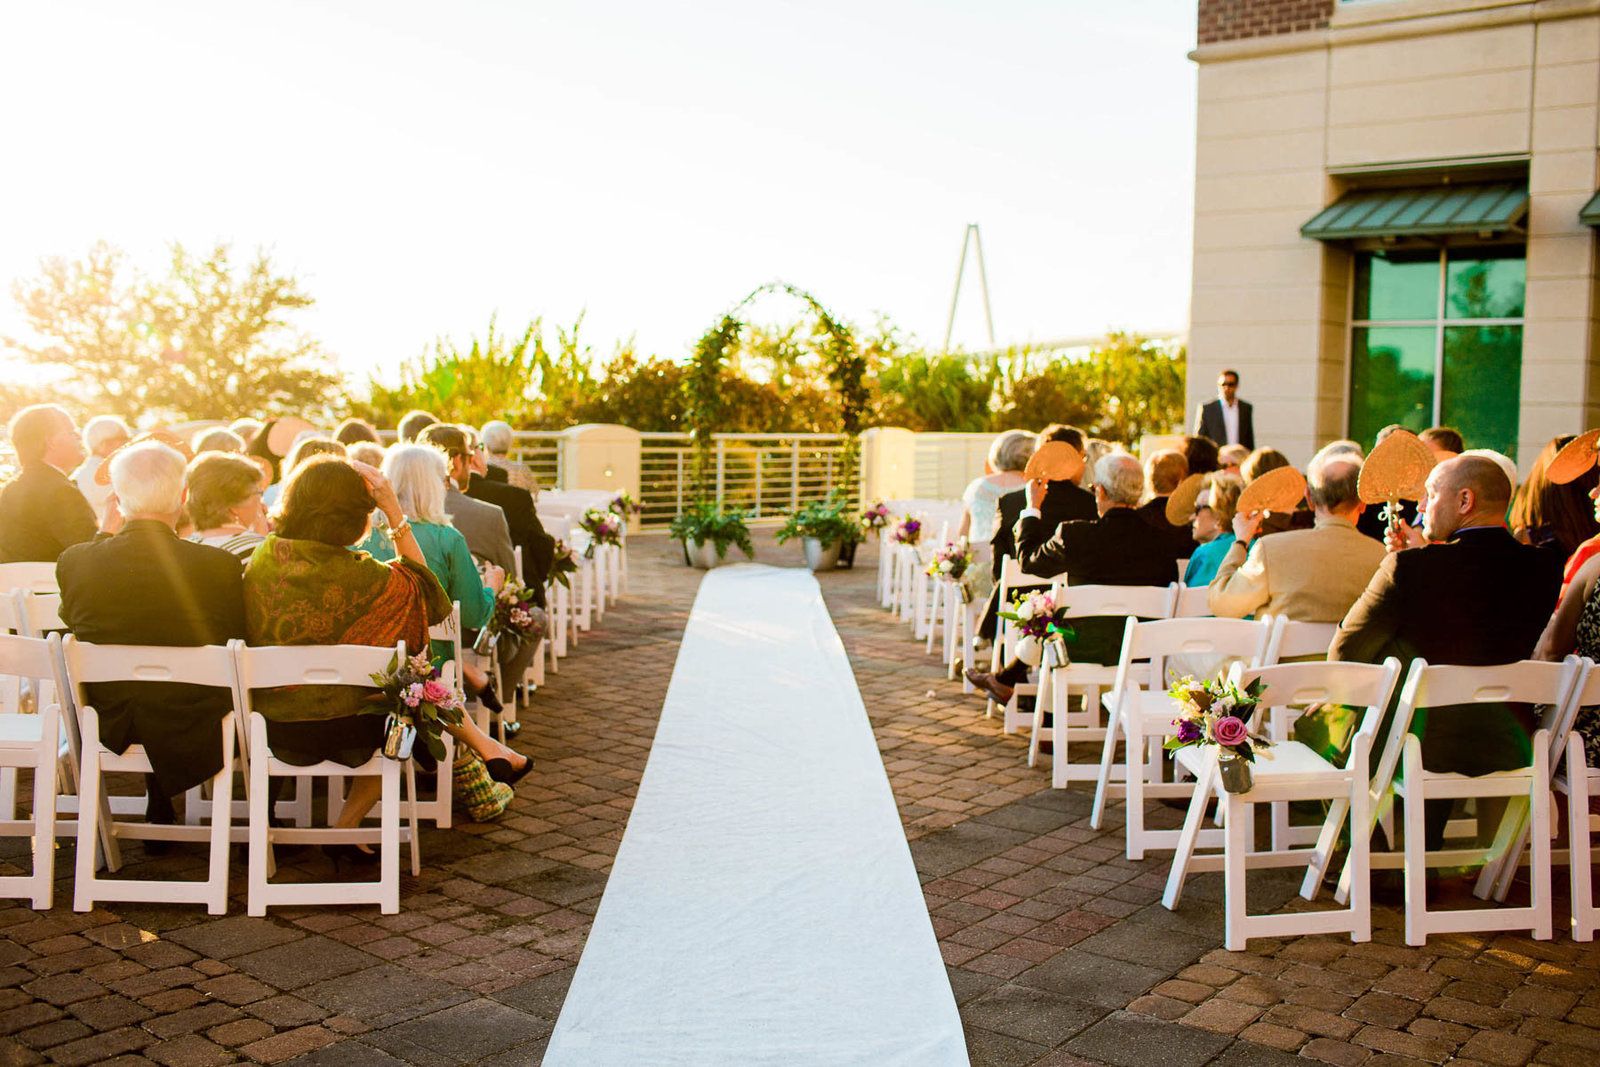 Ivy covered arch are at center of the aisle, Harborside East, Charleston Wedding Photography.